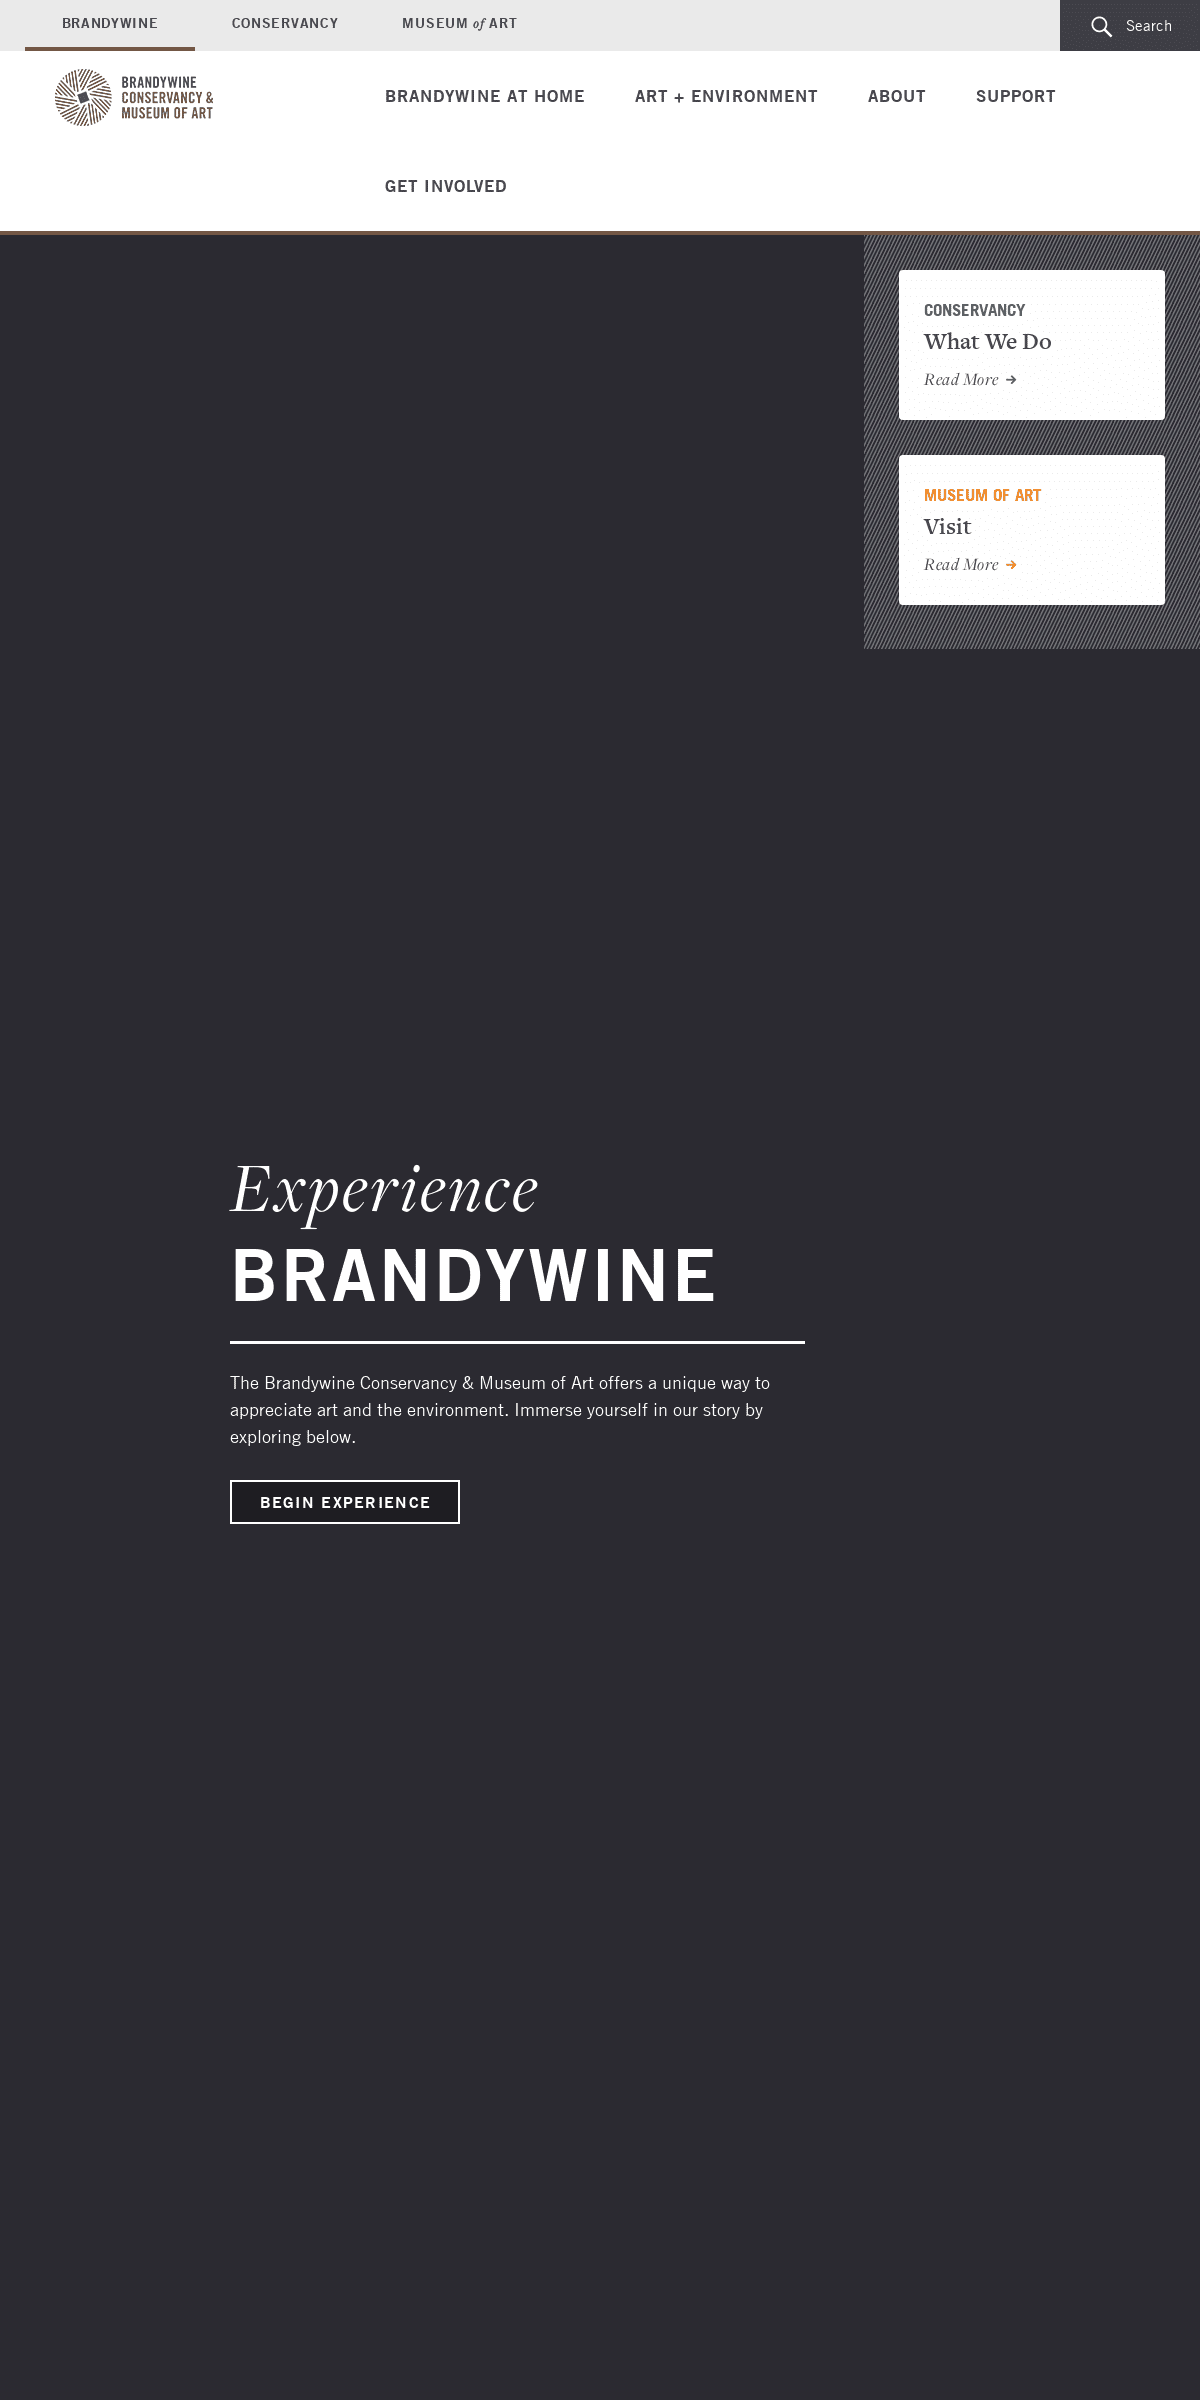 A complete backup of brandywine.org